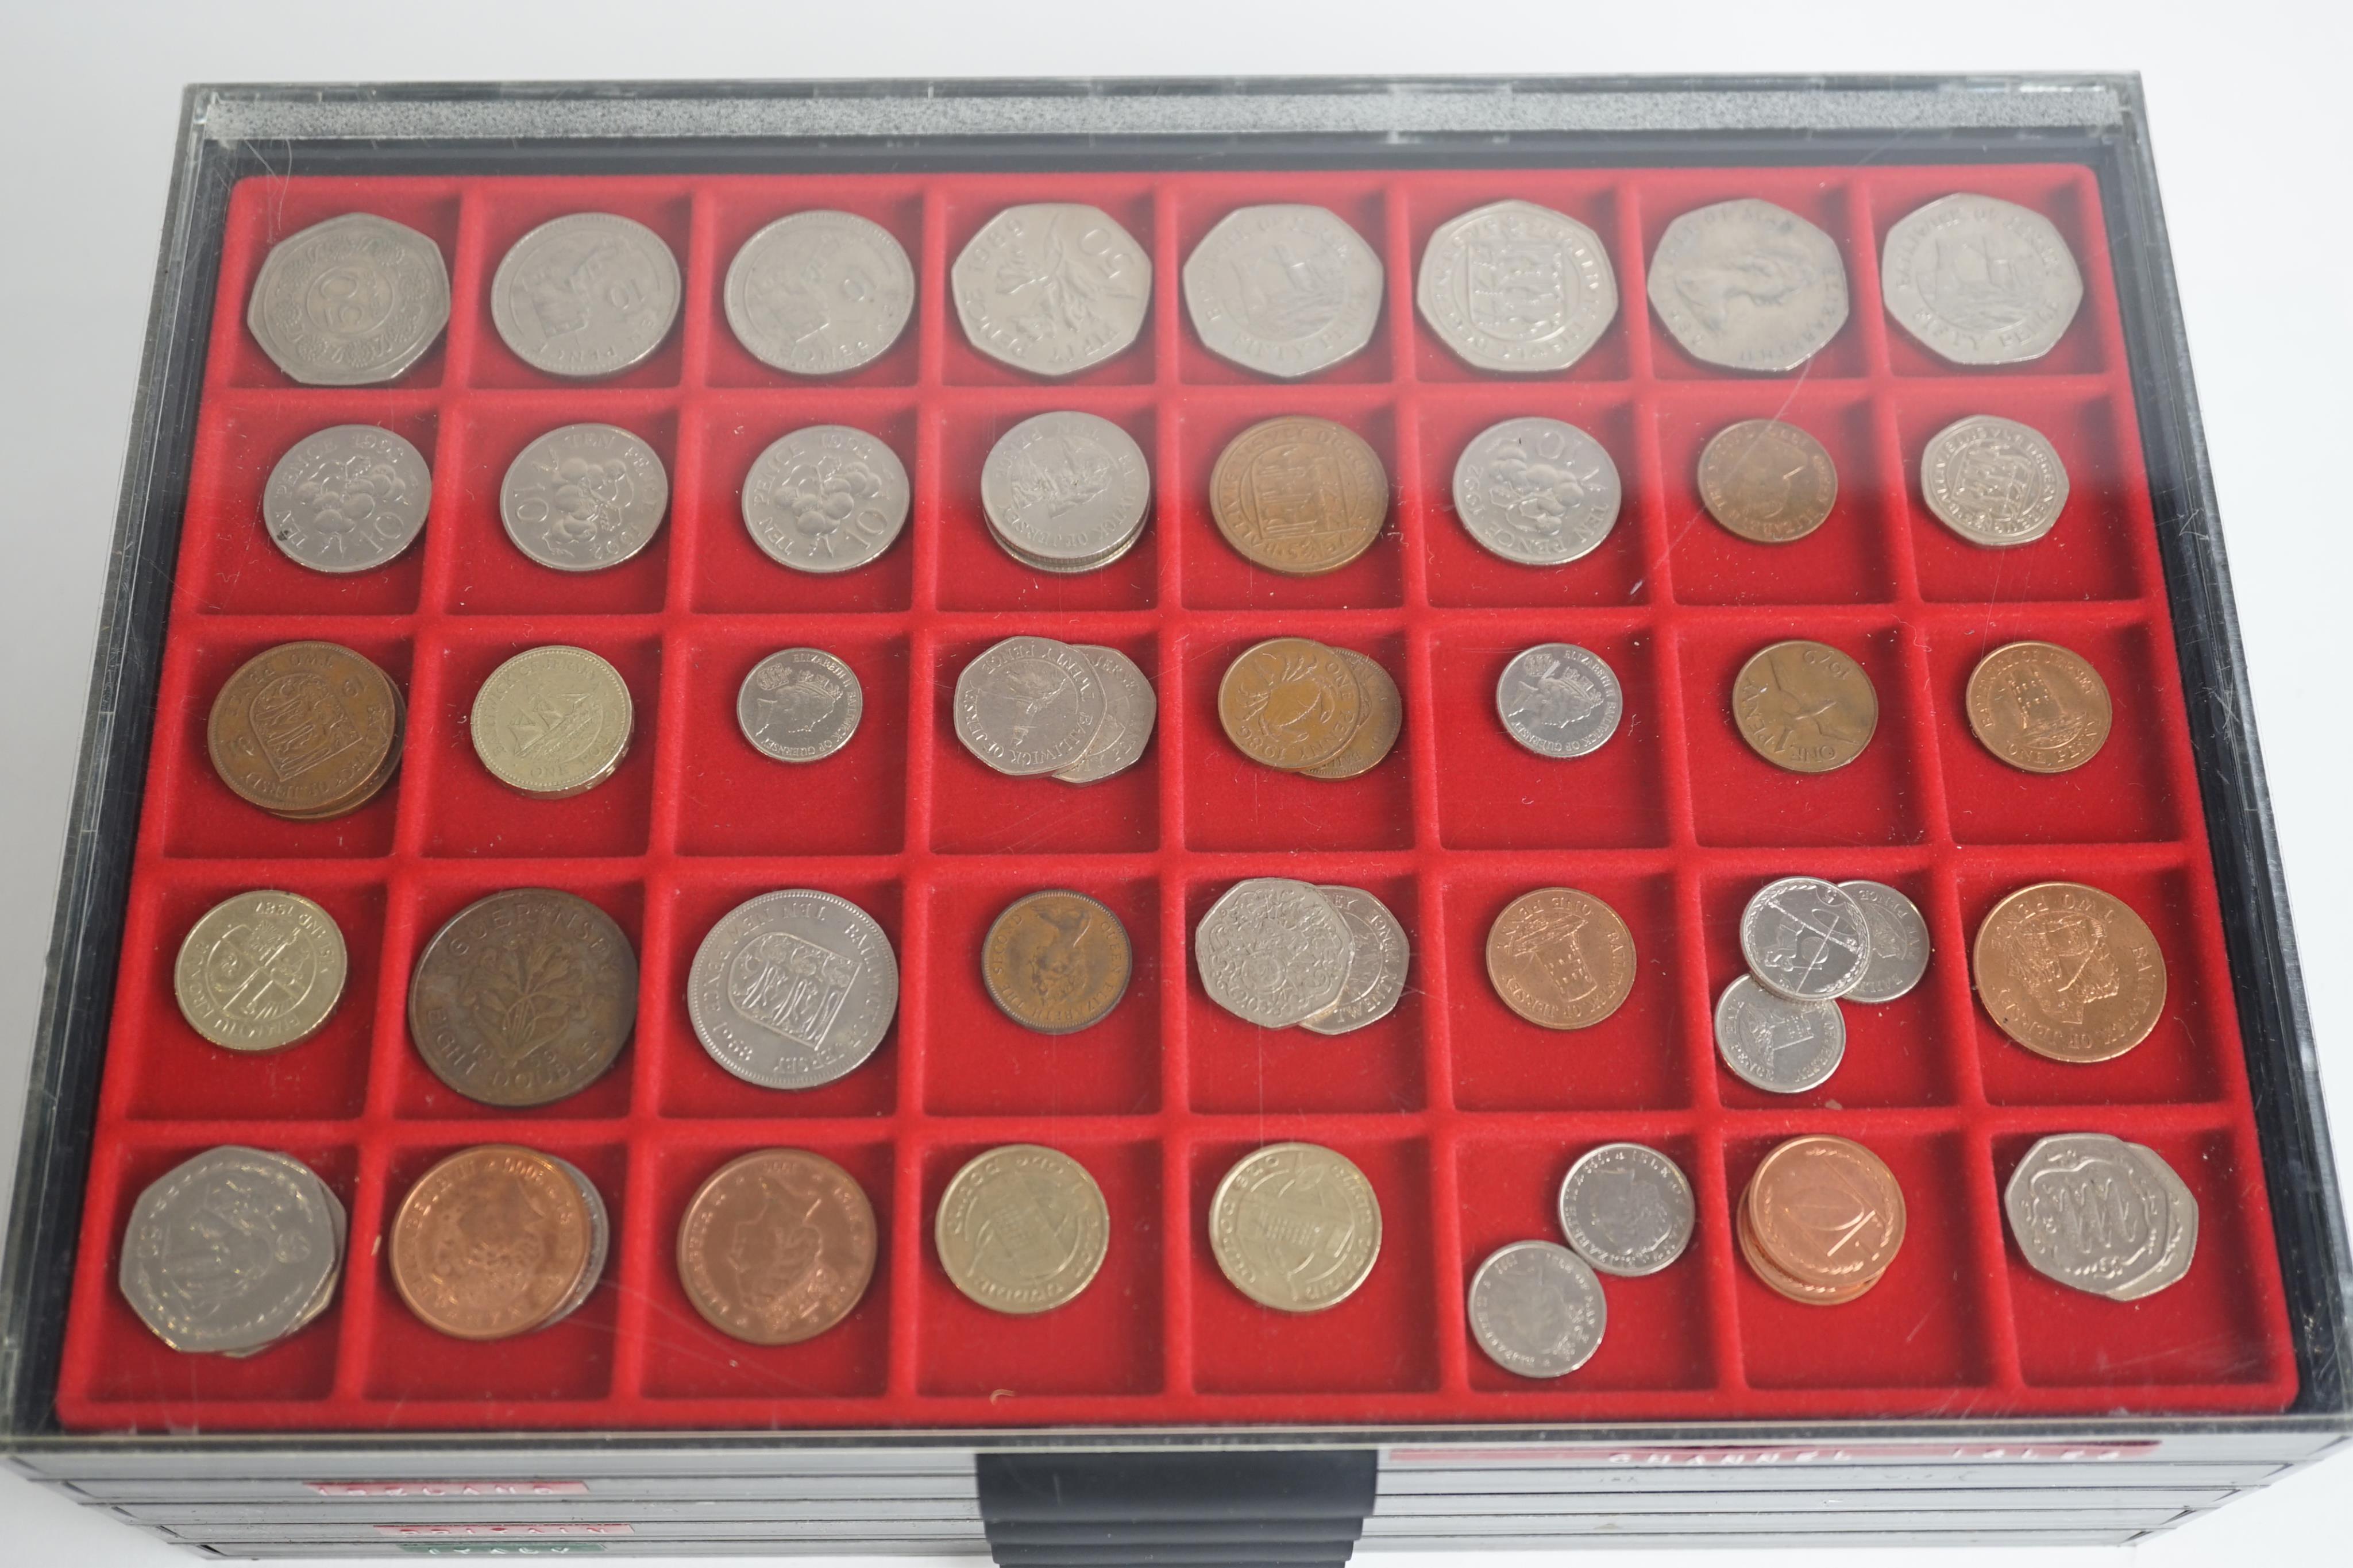 World coins, a collection, mostly 1960s to 1990s, including Hong Kong, Jamaica, Cyprus, Panama, Japan, miscellaneous Arabic, Greece, Germany, Britain, Singapore, South Africa, Ireland, Italy, Spain, Portugal etc., in for